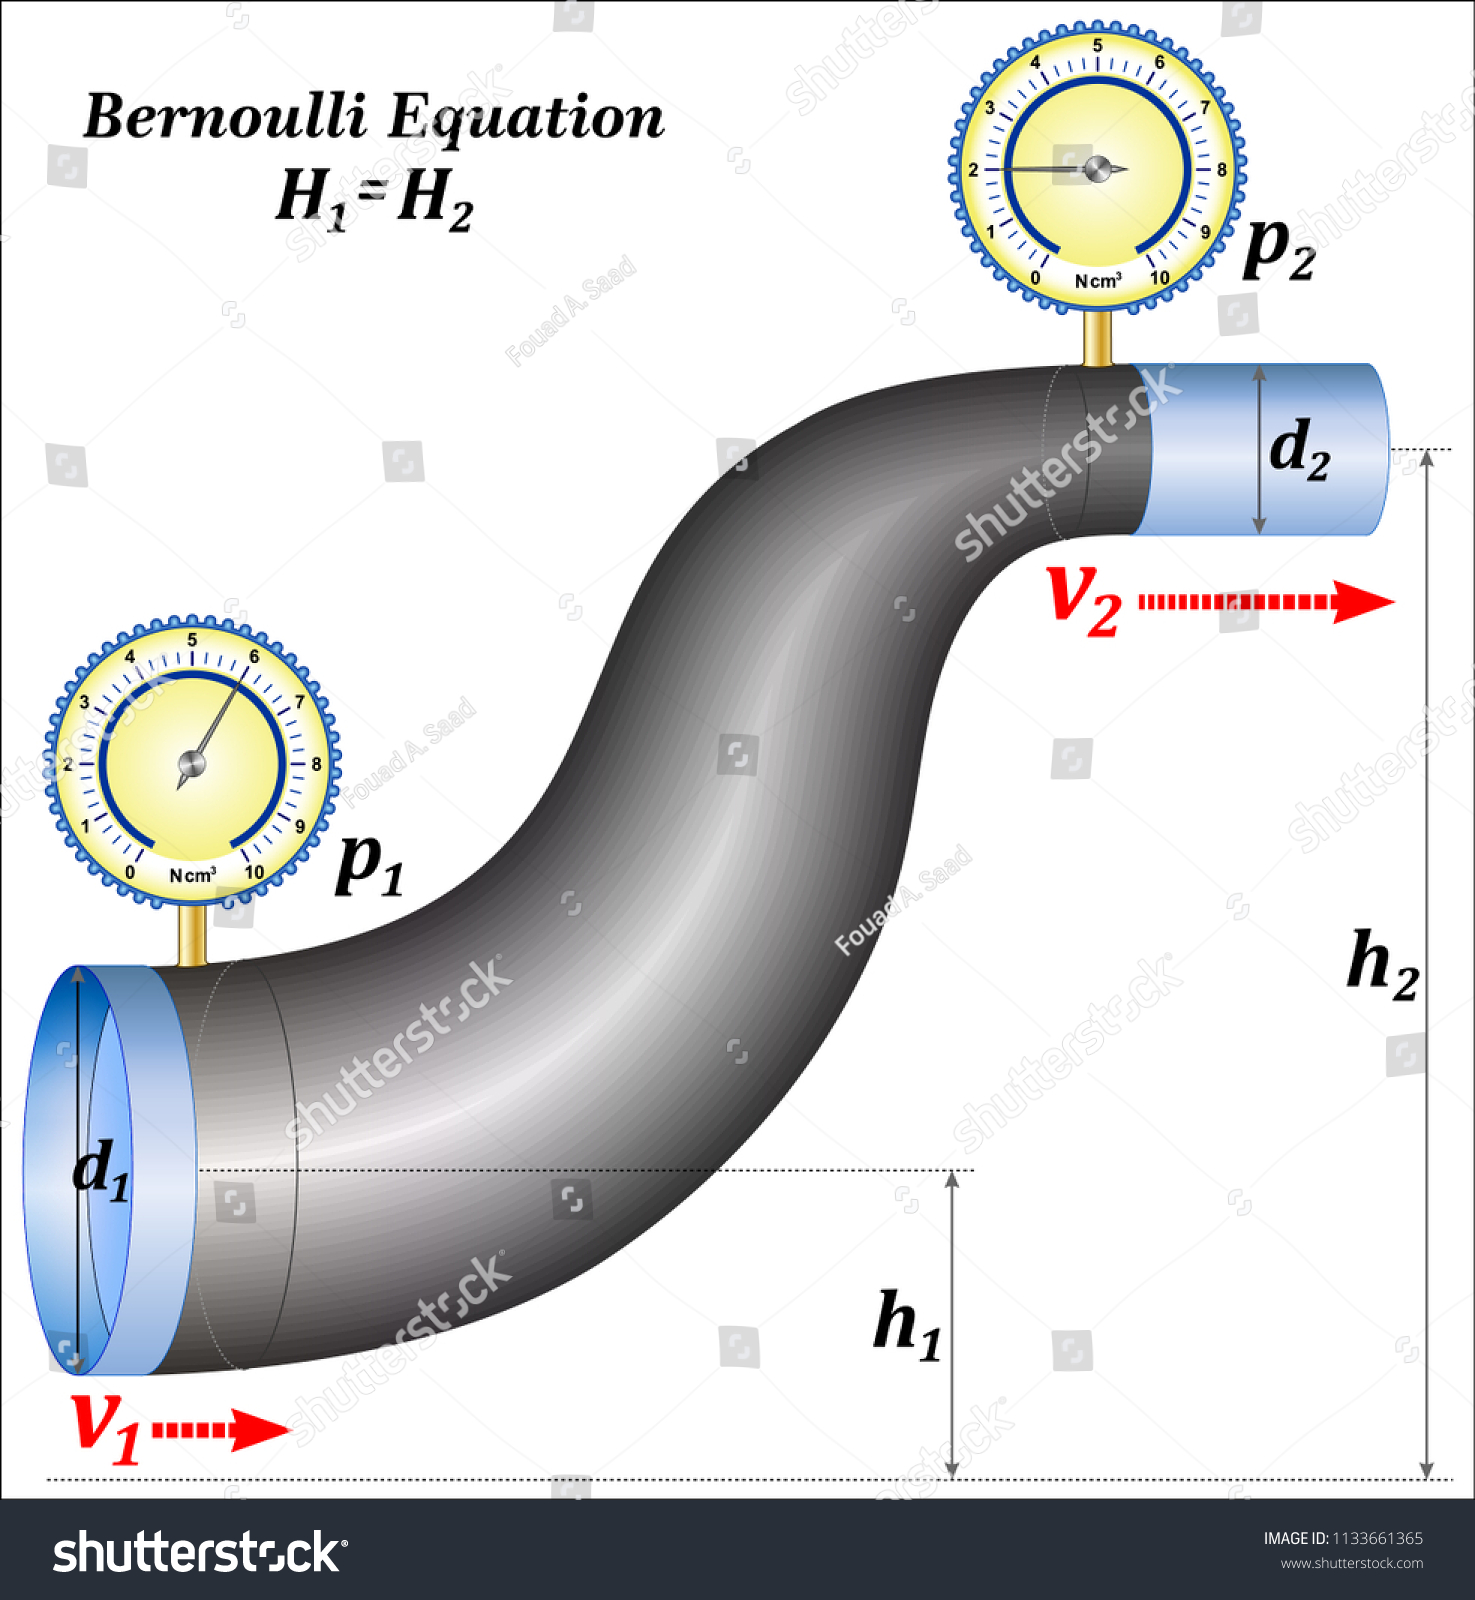 SVG of Bernoulli Equation - The Bernoulli Equation can be considered to be a statement of the conservation of energy principle appropriate for flowing fluids.
 svg